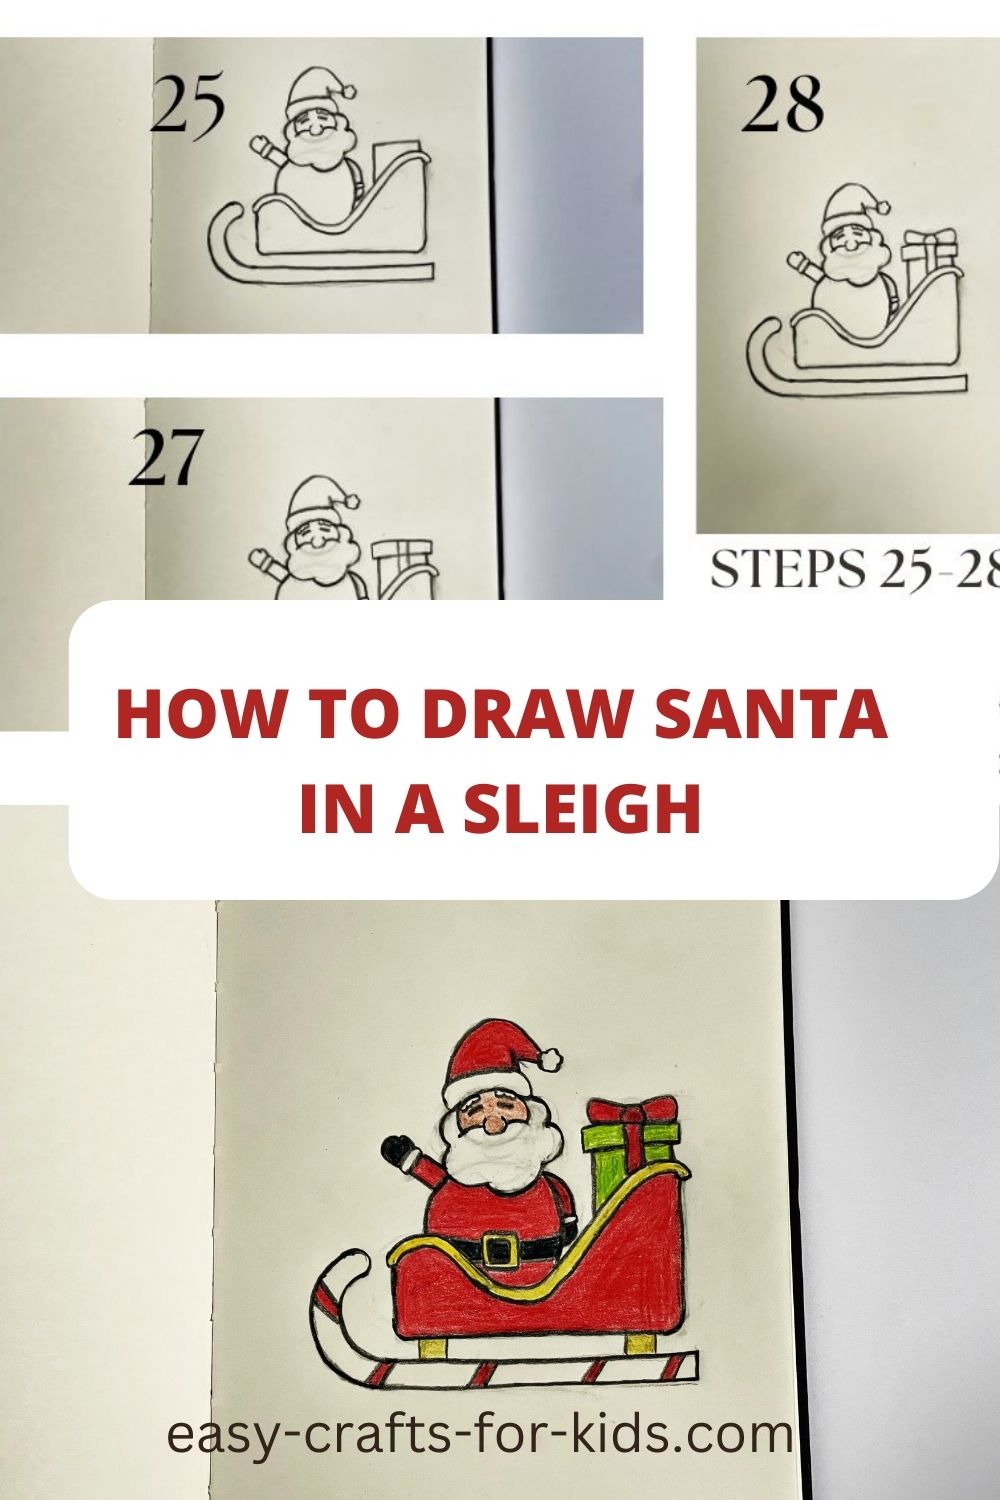 How to Draw Santa in a Sleigh